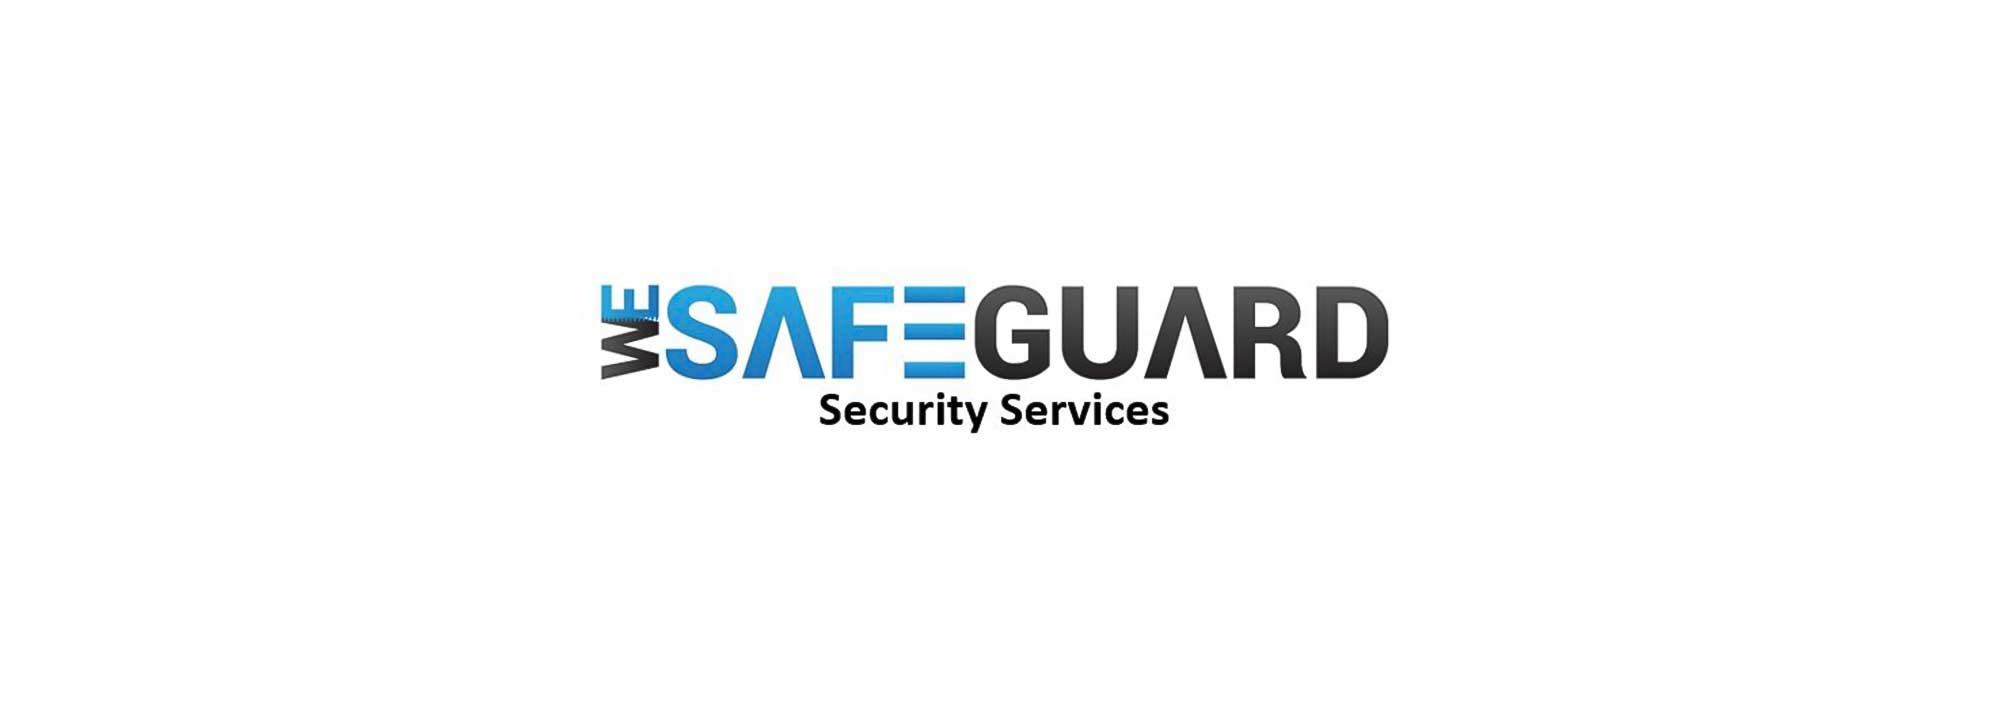 Your security Solution,                                 Call us today 866-568-0052